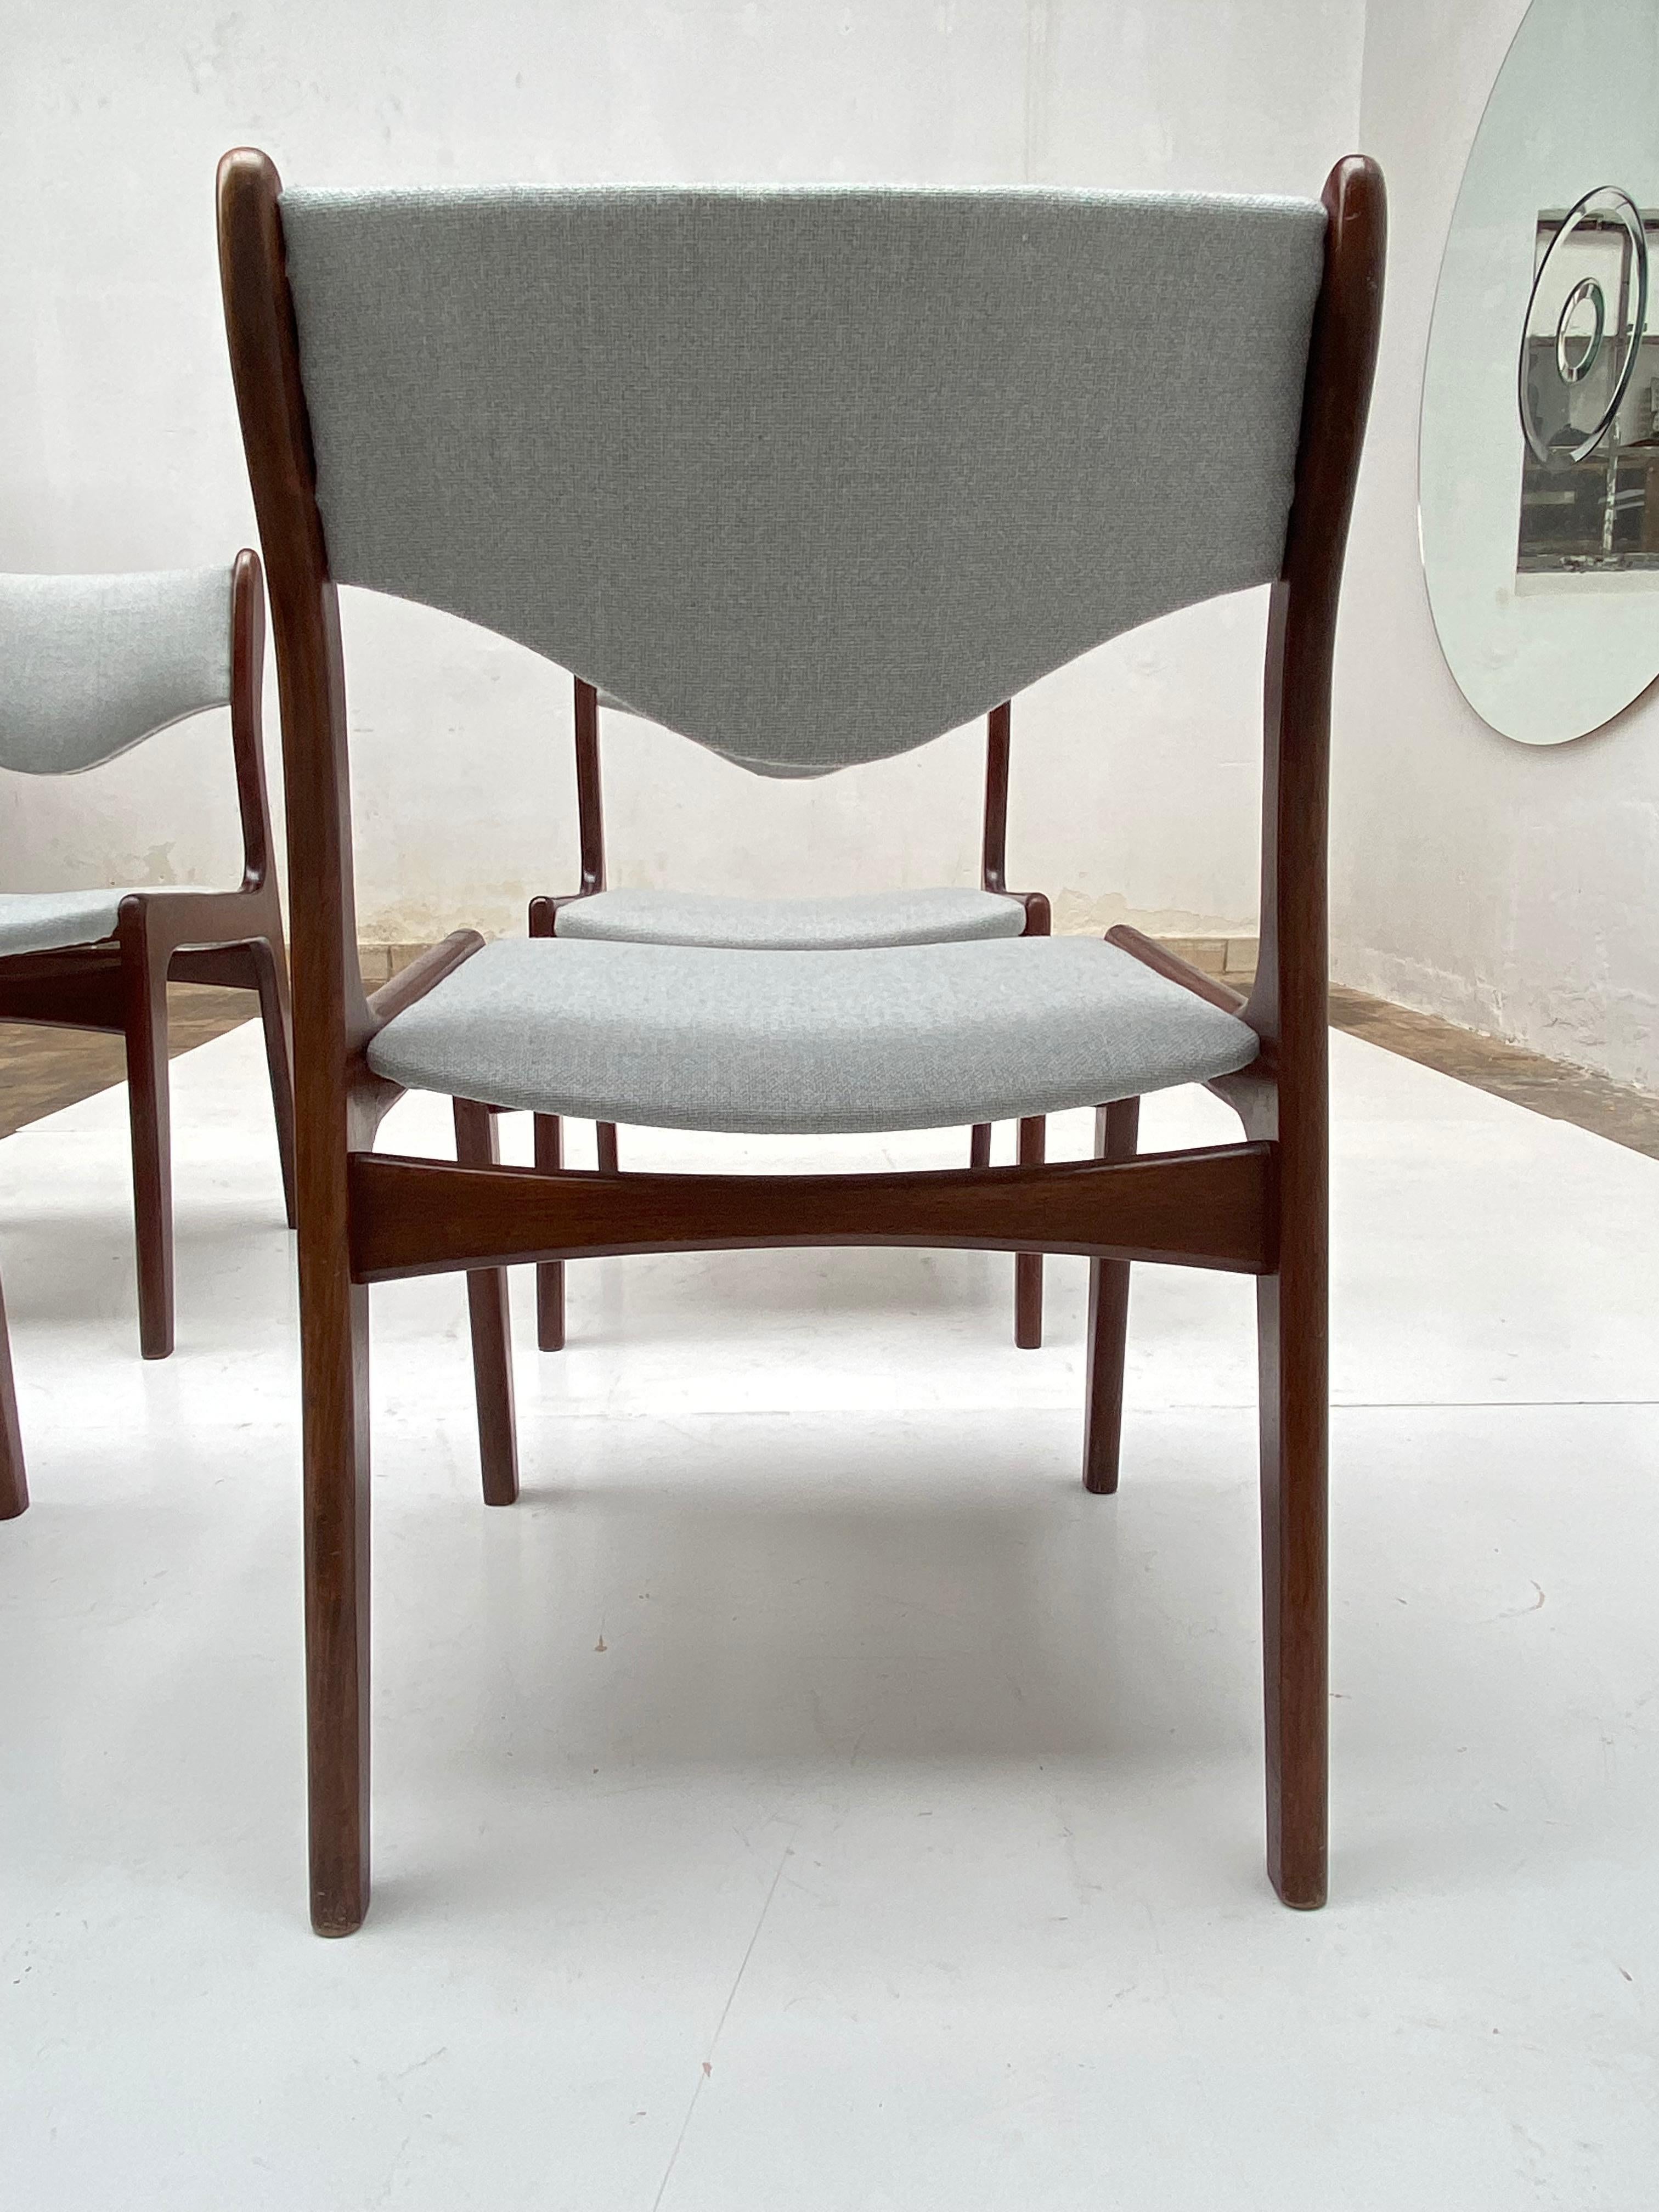 Johannes Andersen Set of 4 Solid Teak Dining Chairs produced by Mahjongg, 1960's For Sale 2